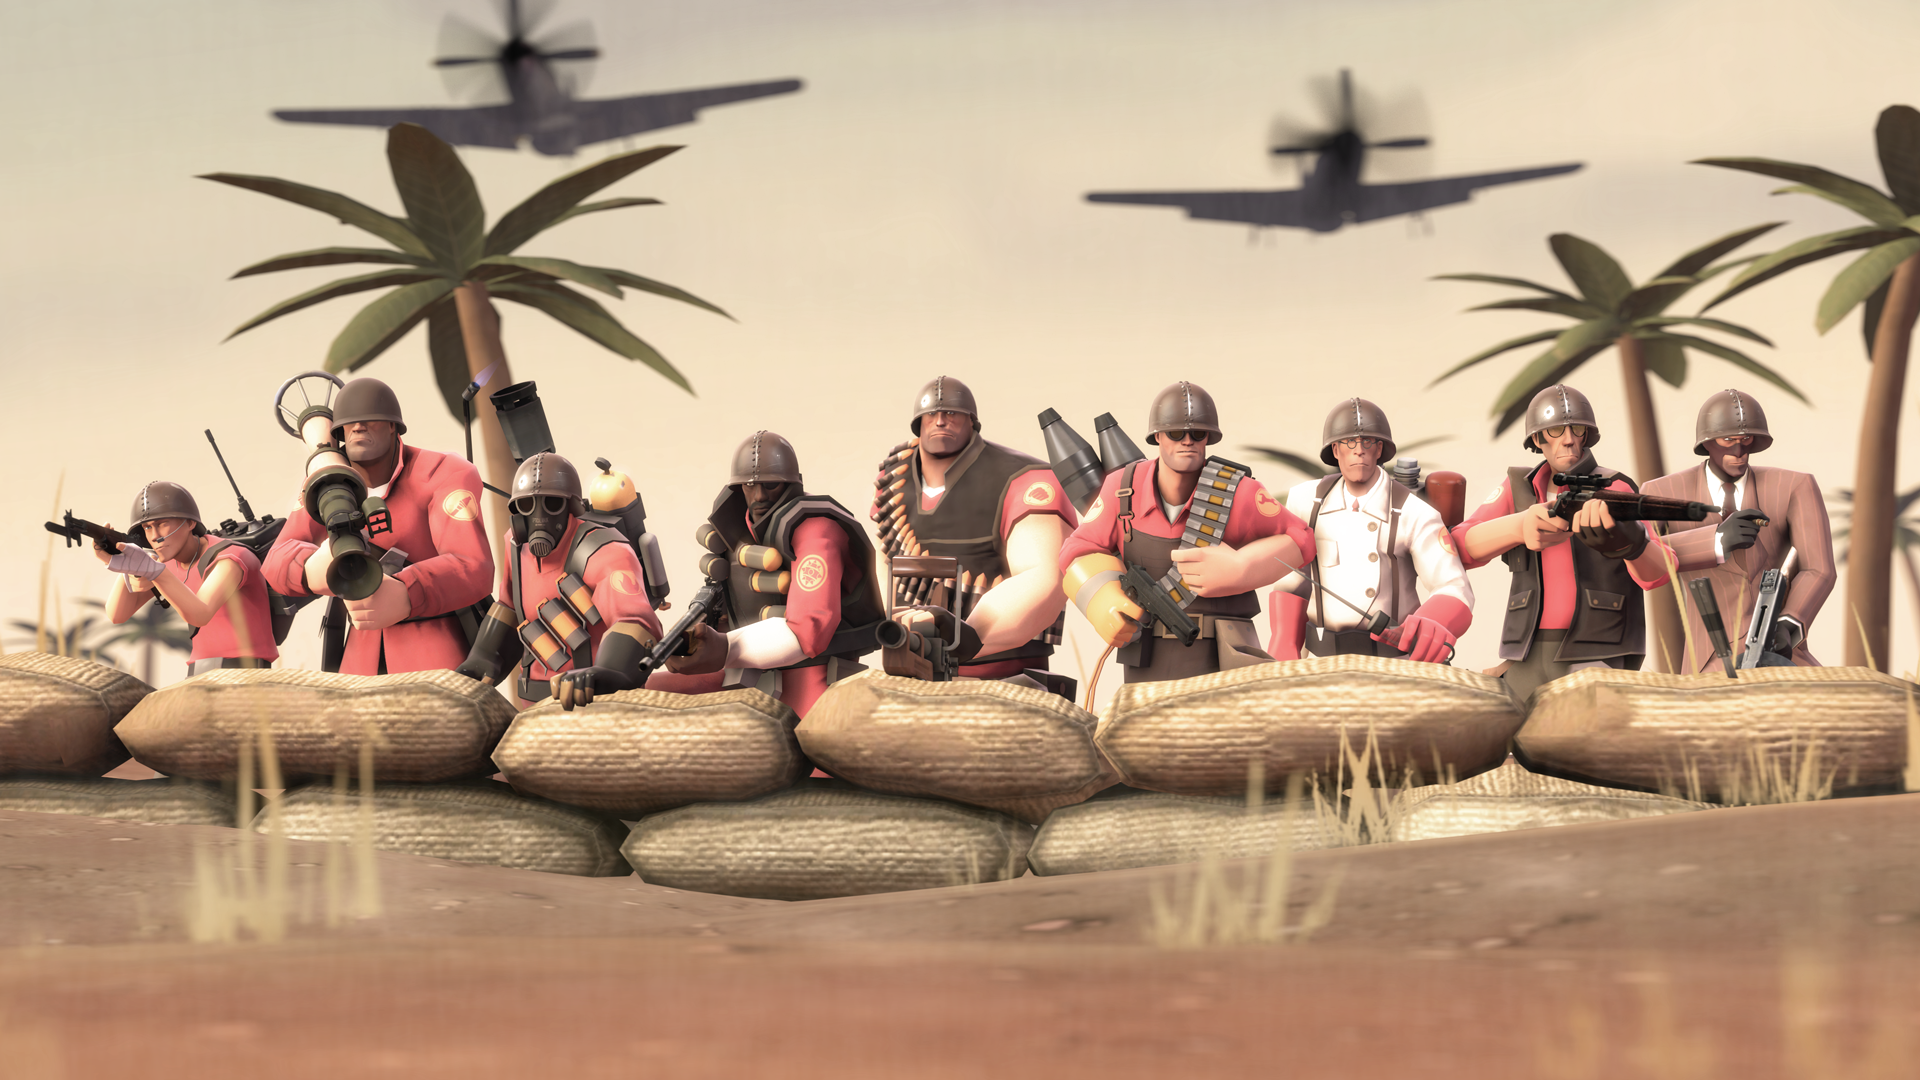 Team Fortress 2 at DreamHack Winter 2015